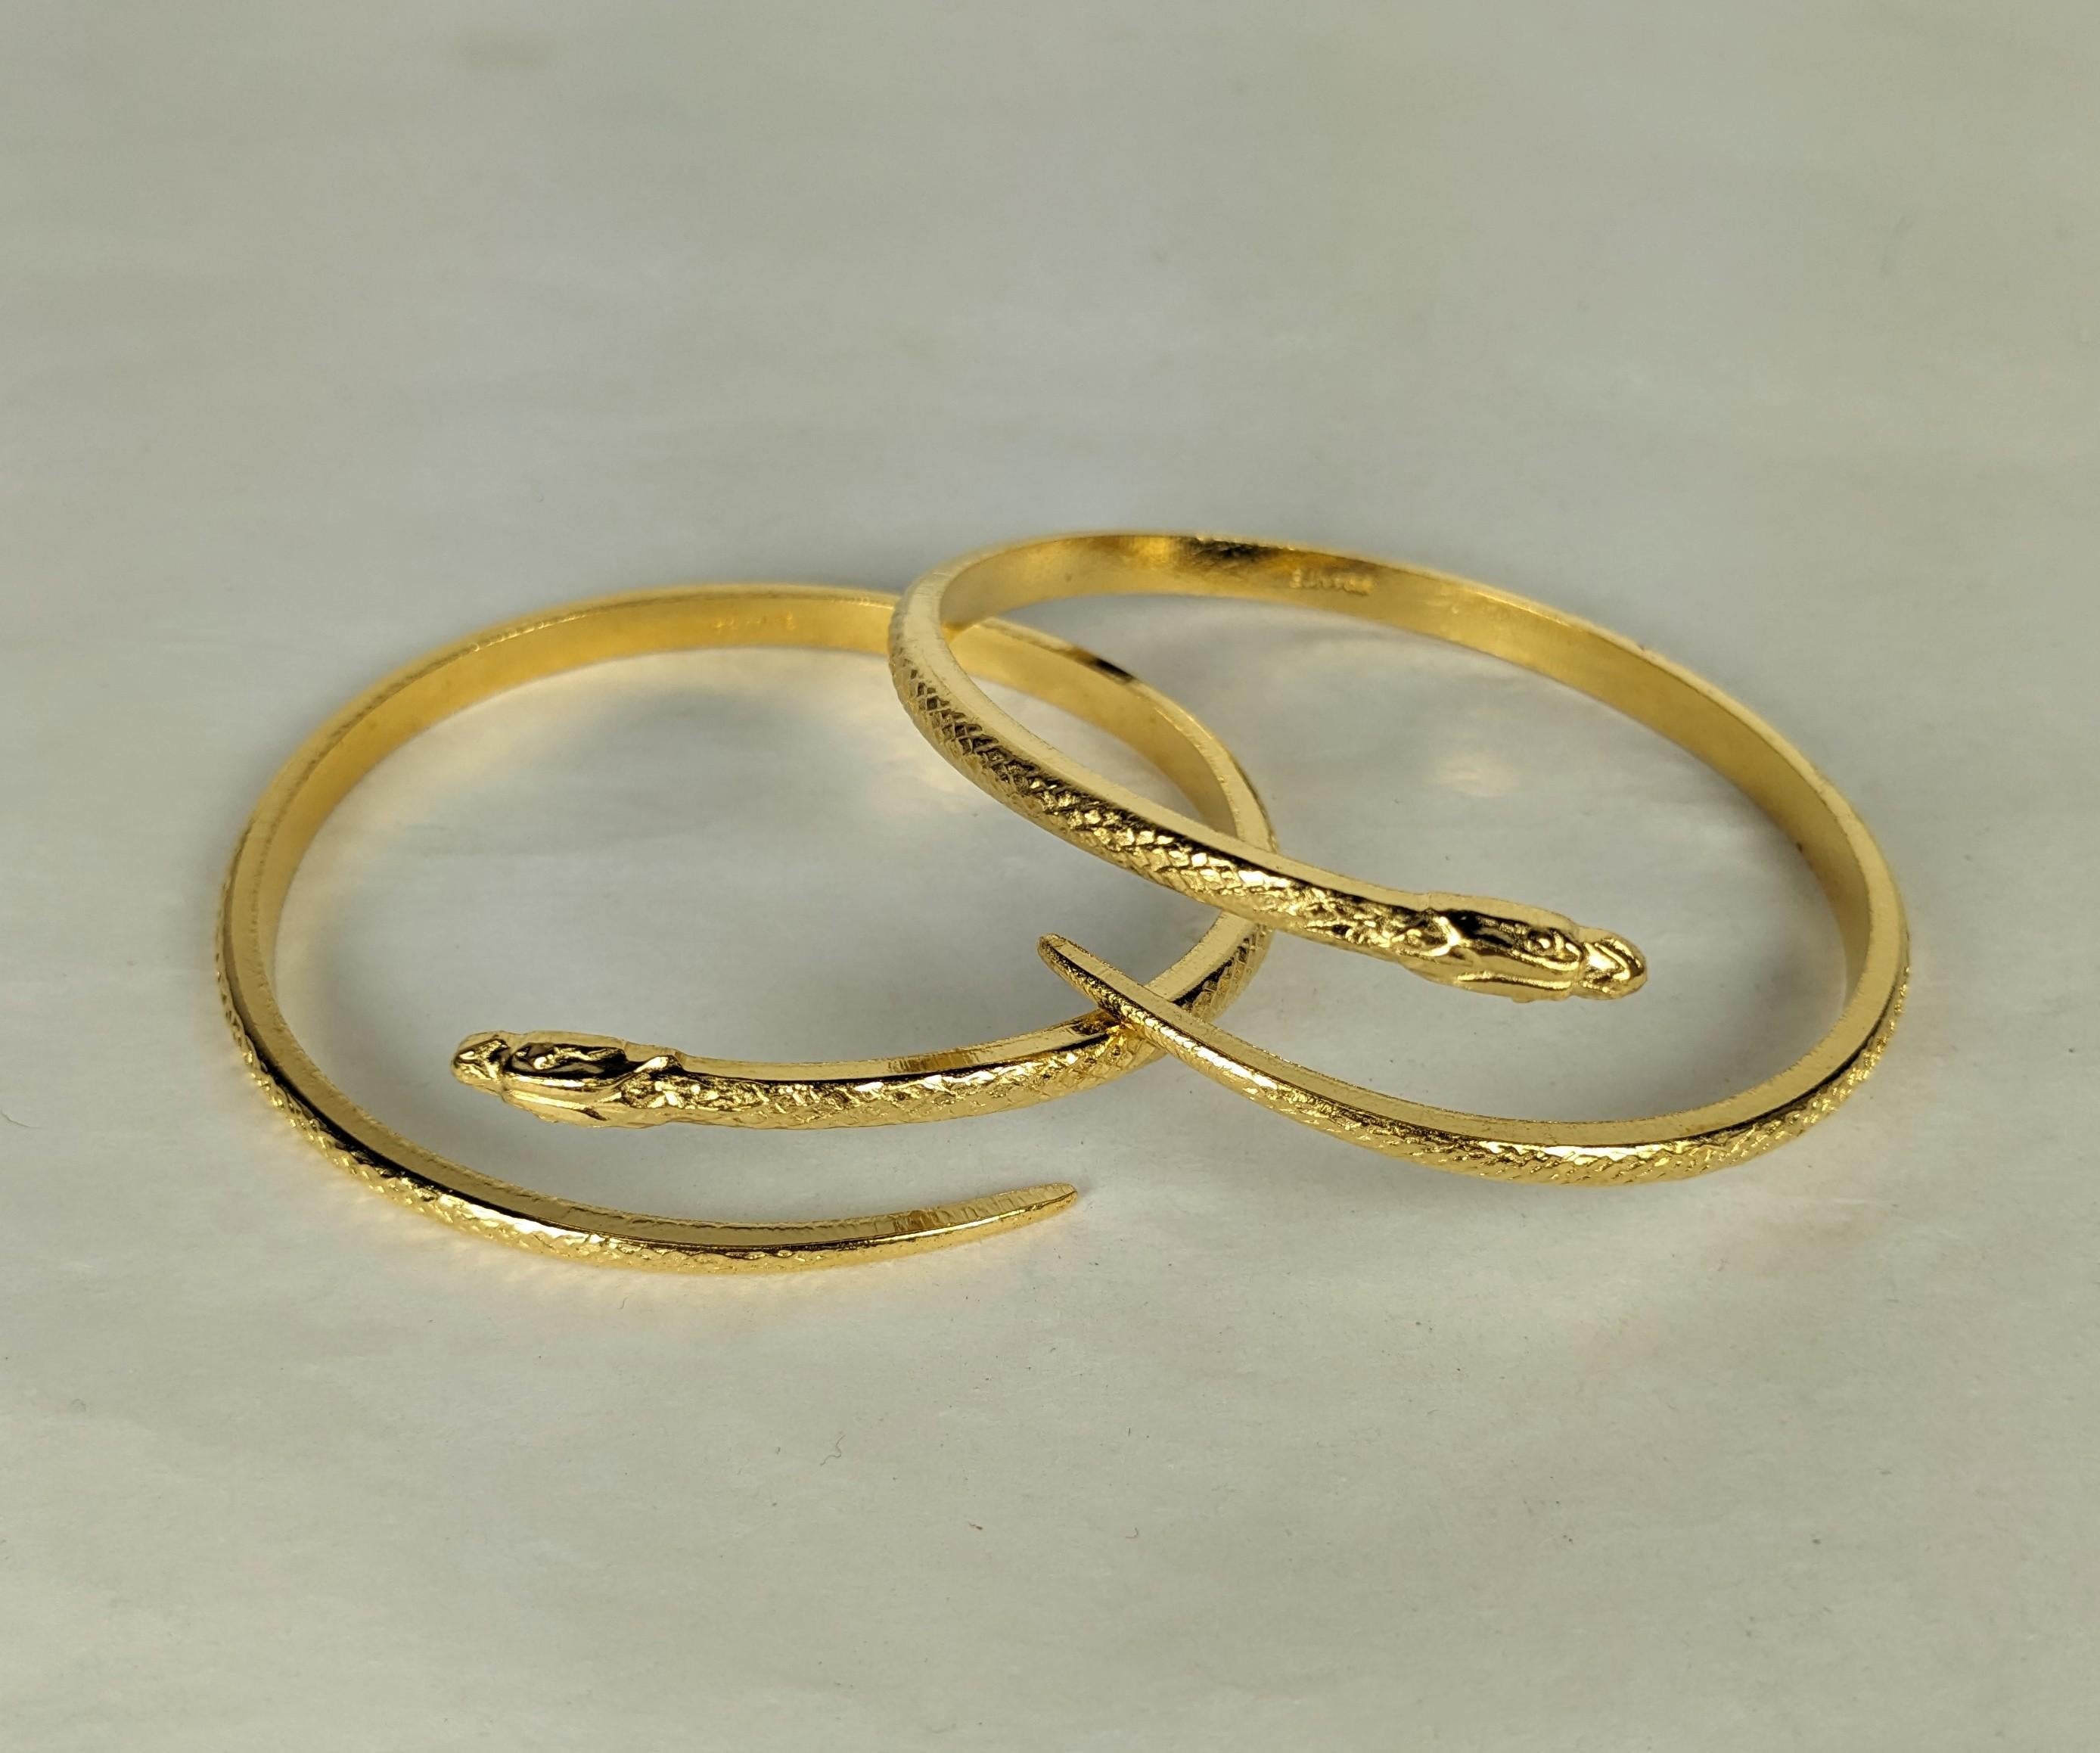 Pair of French Victorian Revival 1960's wrap snake bangle bracelets of finely detailed, incised gilded brass. Wear stacked together or alone. New old stock, Made in France. Excellent Condition. Marked France
Interior diameter 2.5